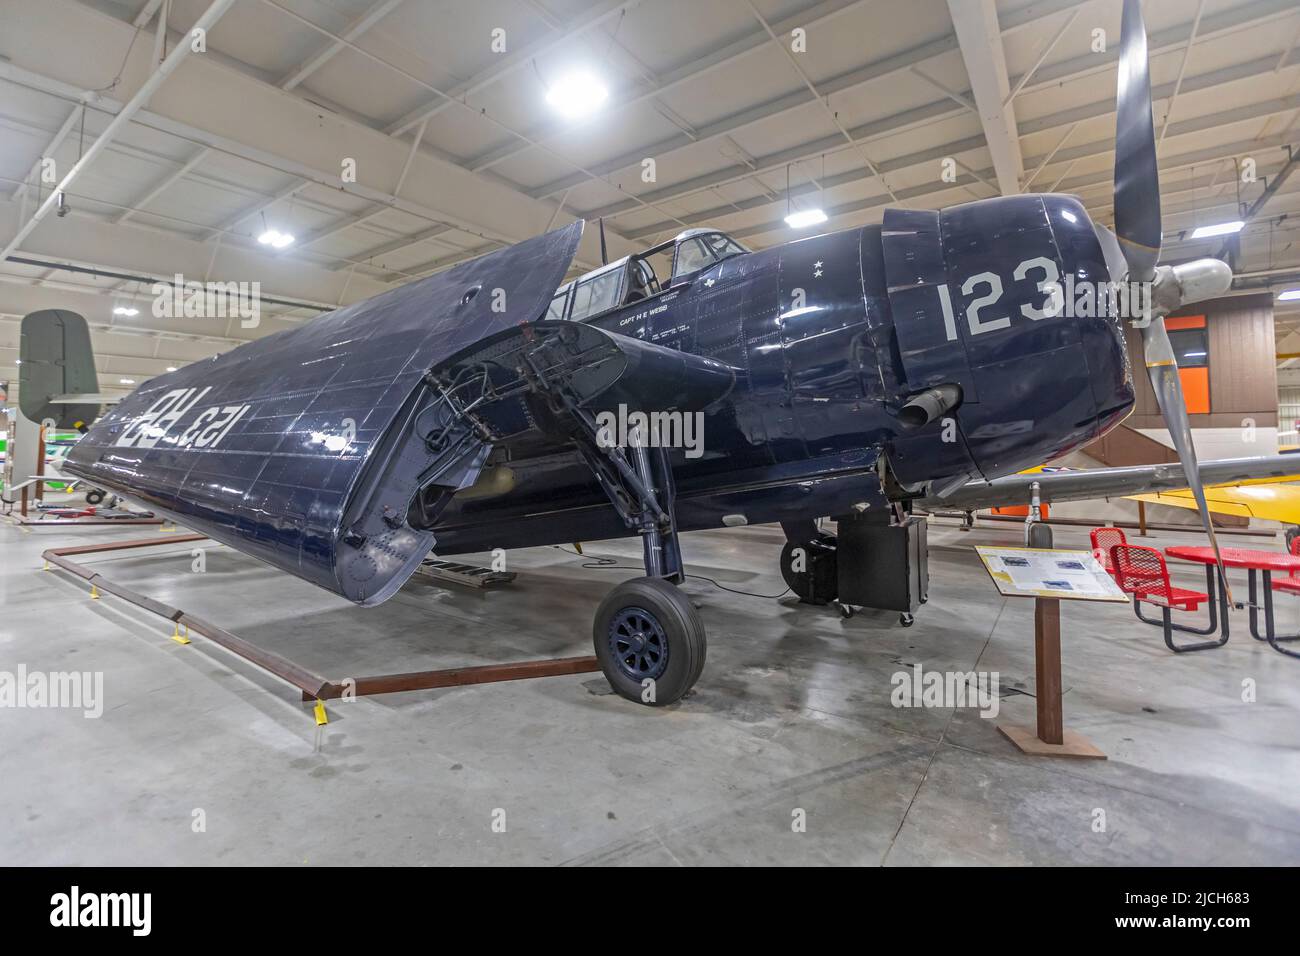 Liberal, Kansas - The Mid-America Air Museum. The museum displays over 100 aircraft. The Grumman TBM Avenger was the U.S. Navy's torpedo bomber during Stock Photo